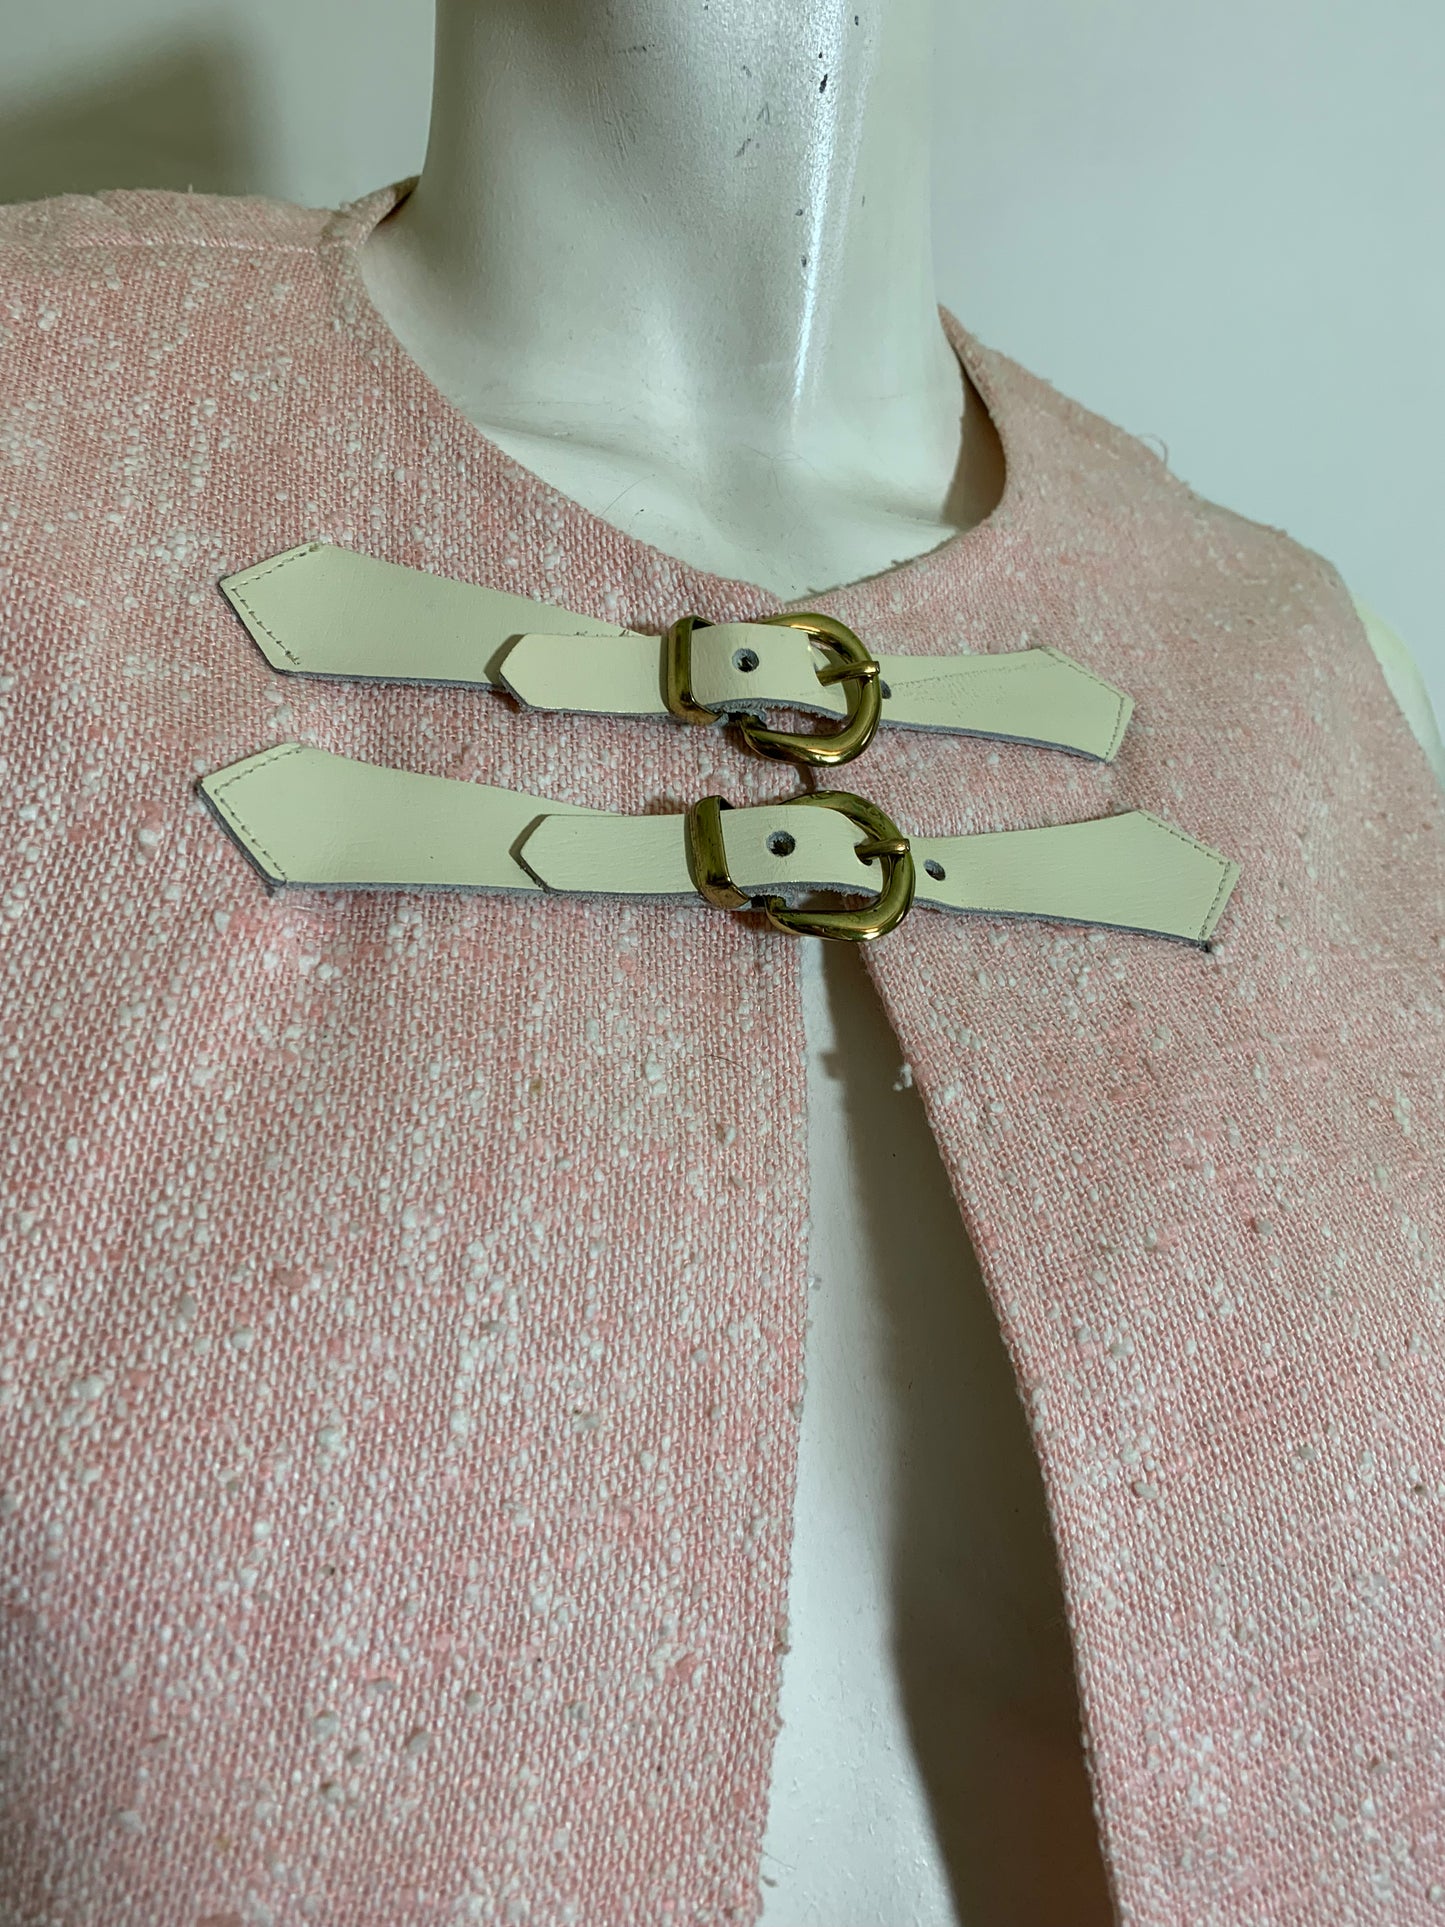 Slubbed Pink Rayon Vest and Mini Skirt Set with Buckles circa 1970s